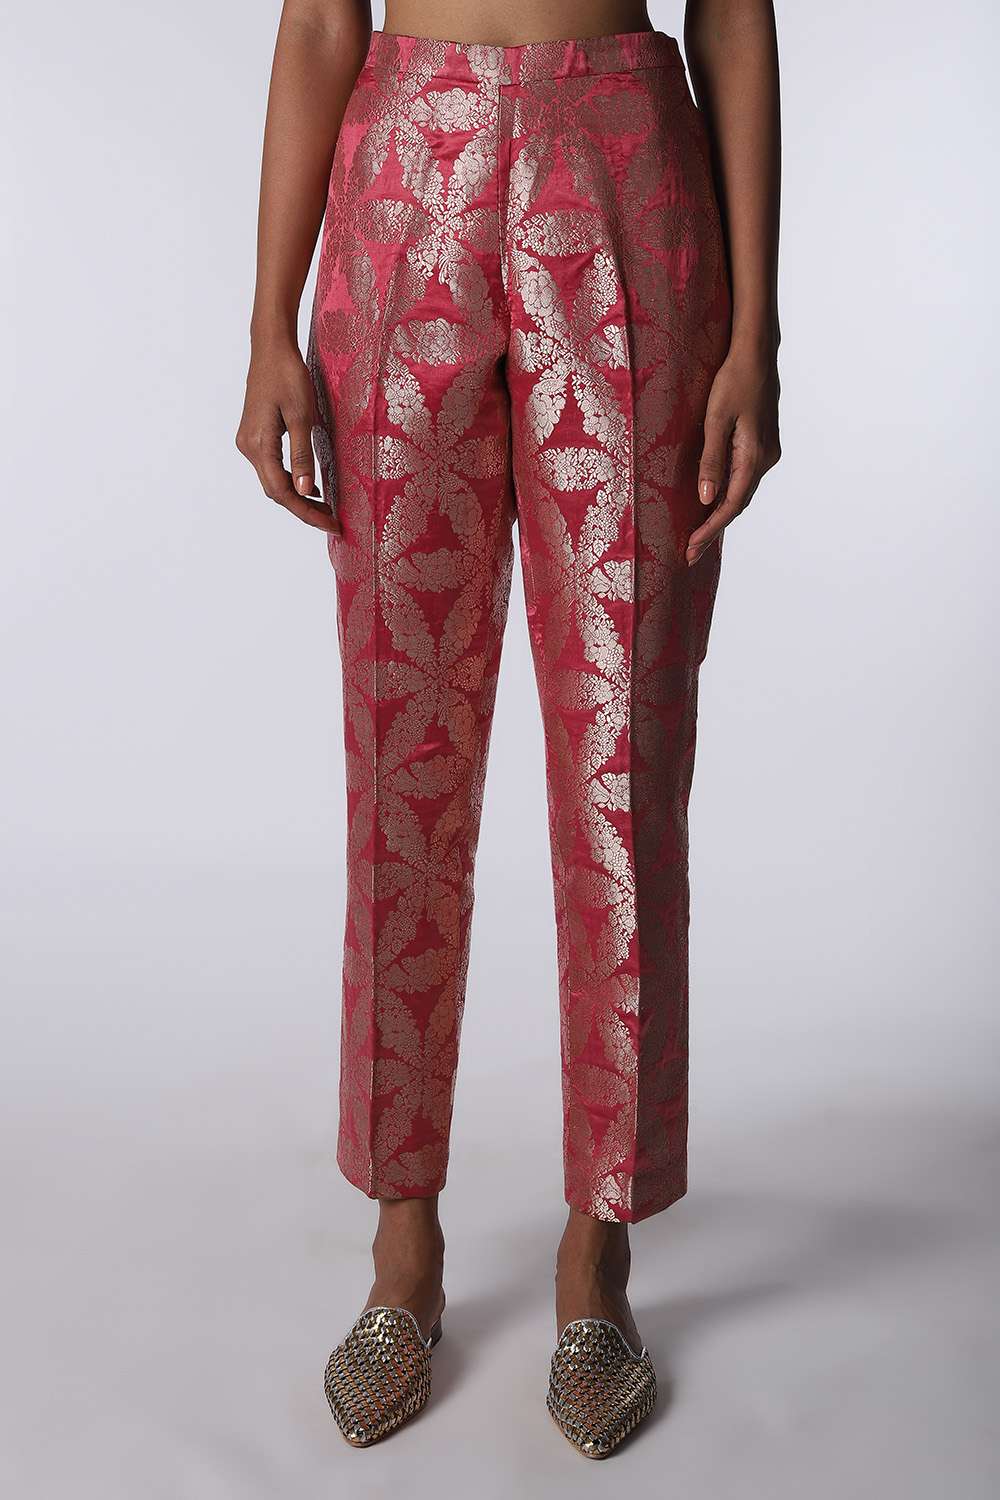 Buy online Peppy Pink Brocade Pants from bottom wear for Women by Schwof  for 719 at 55 off  2023 Limeroadcom